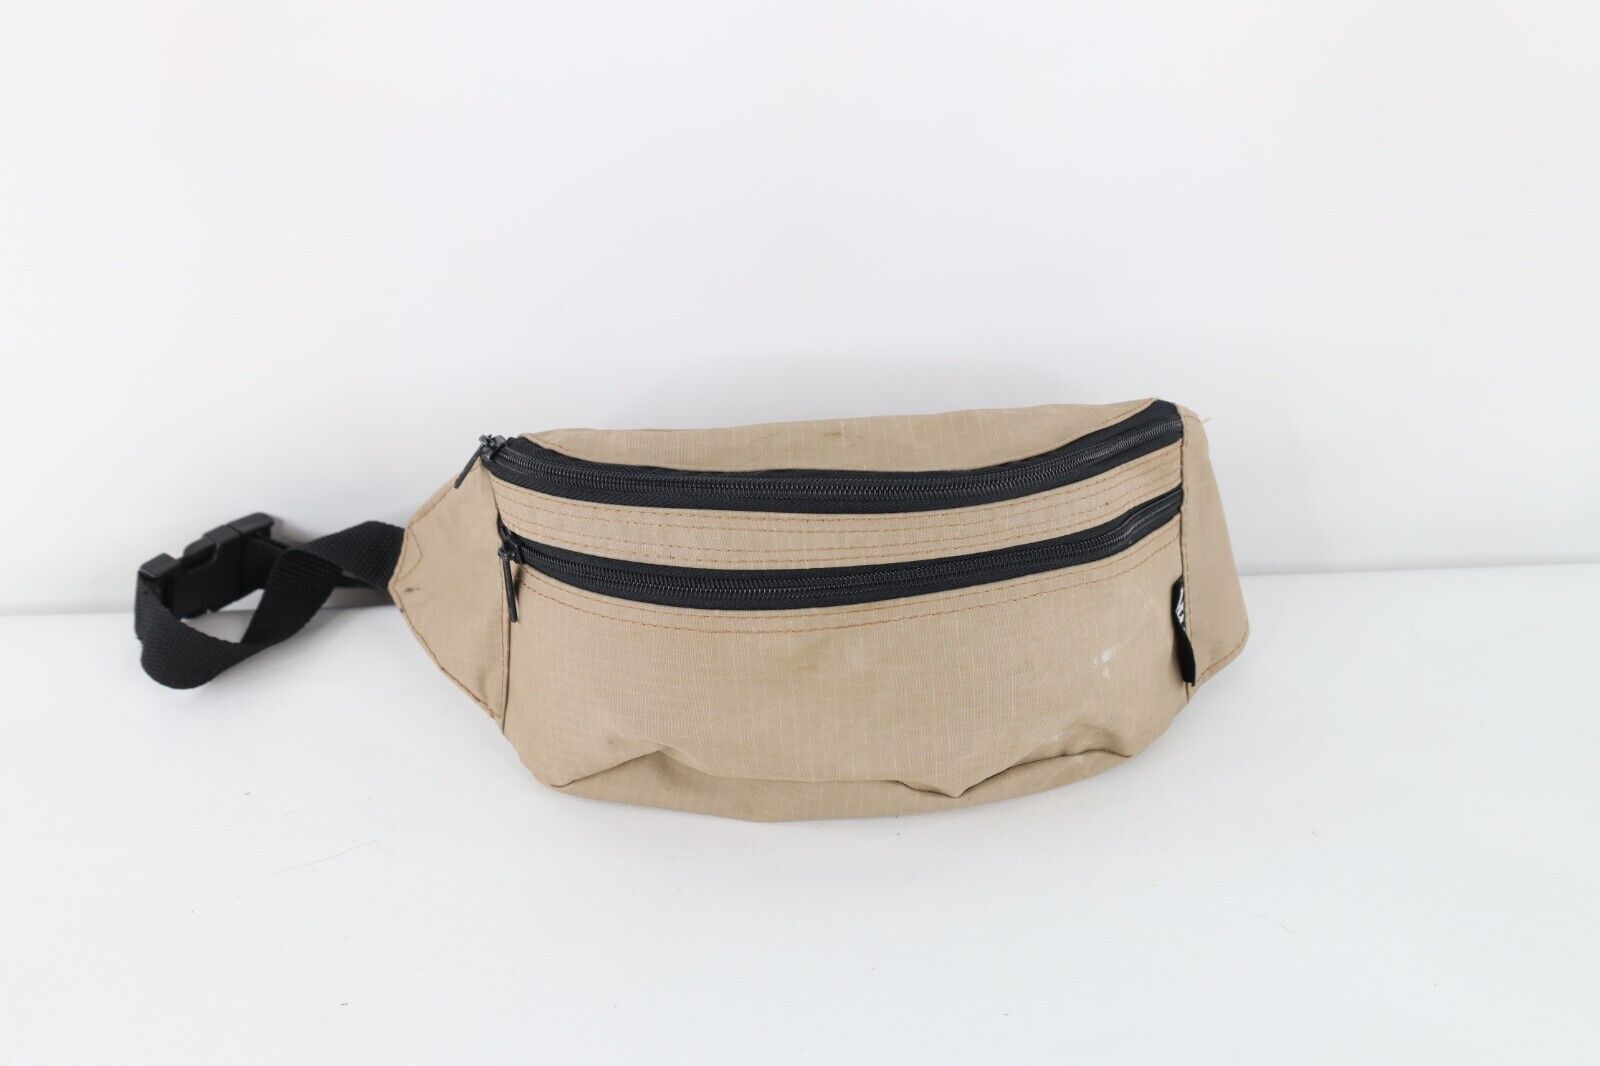 Primary image for Vtg 90s Streetwear Distressed Waterproof Ripstop Festival Fanny Pack Waist Bag